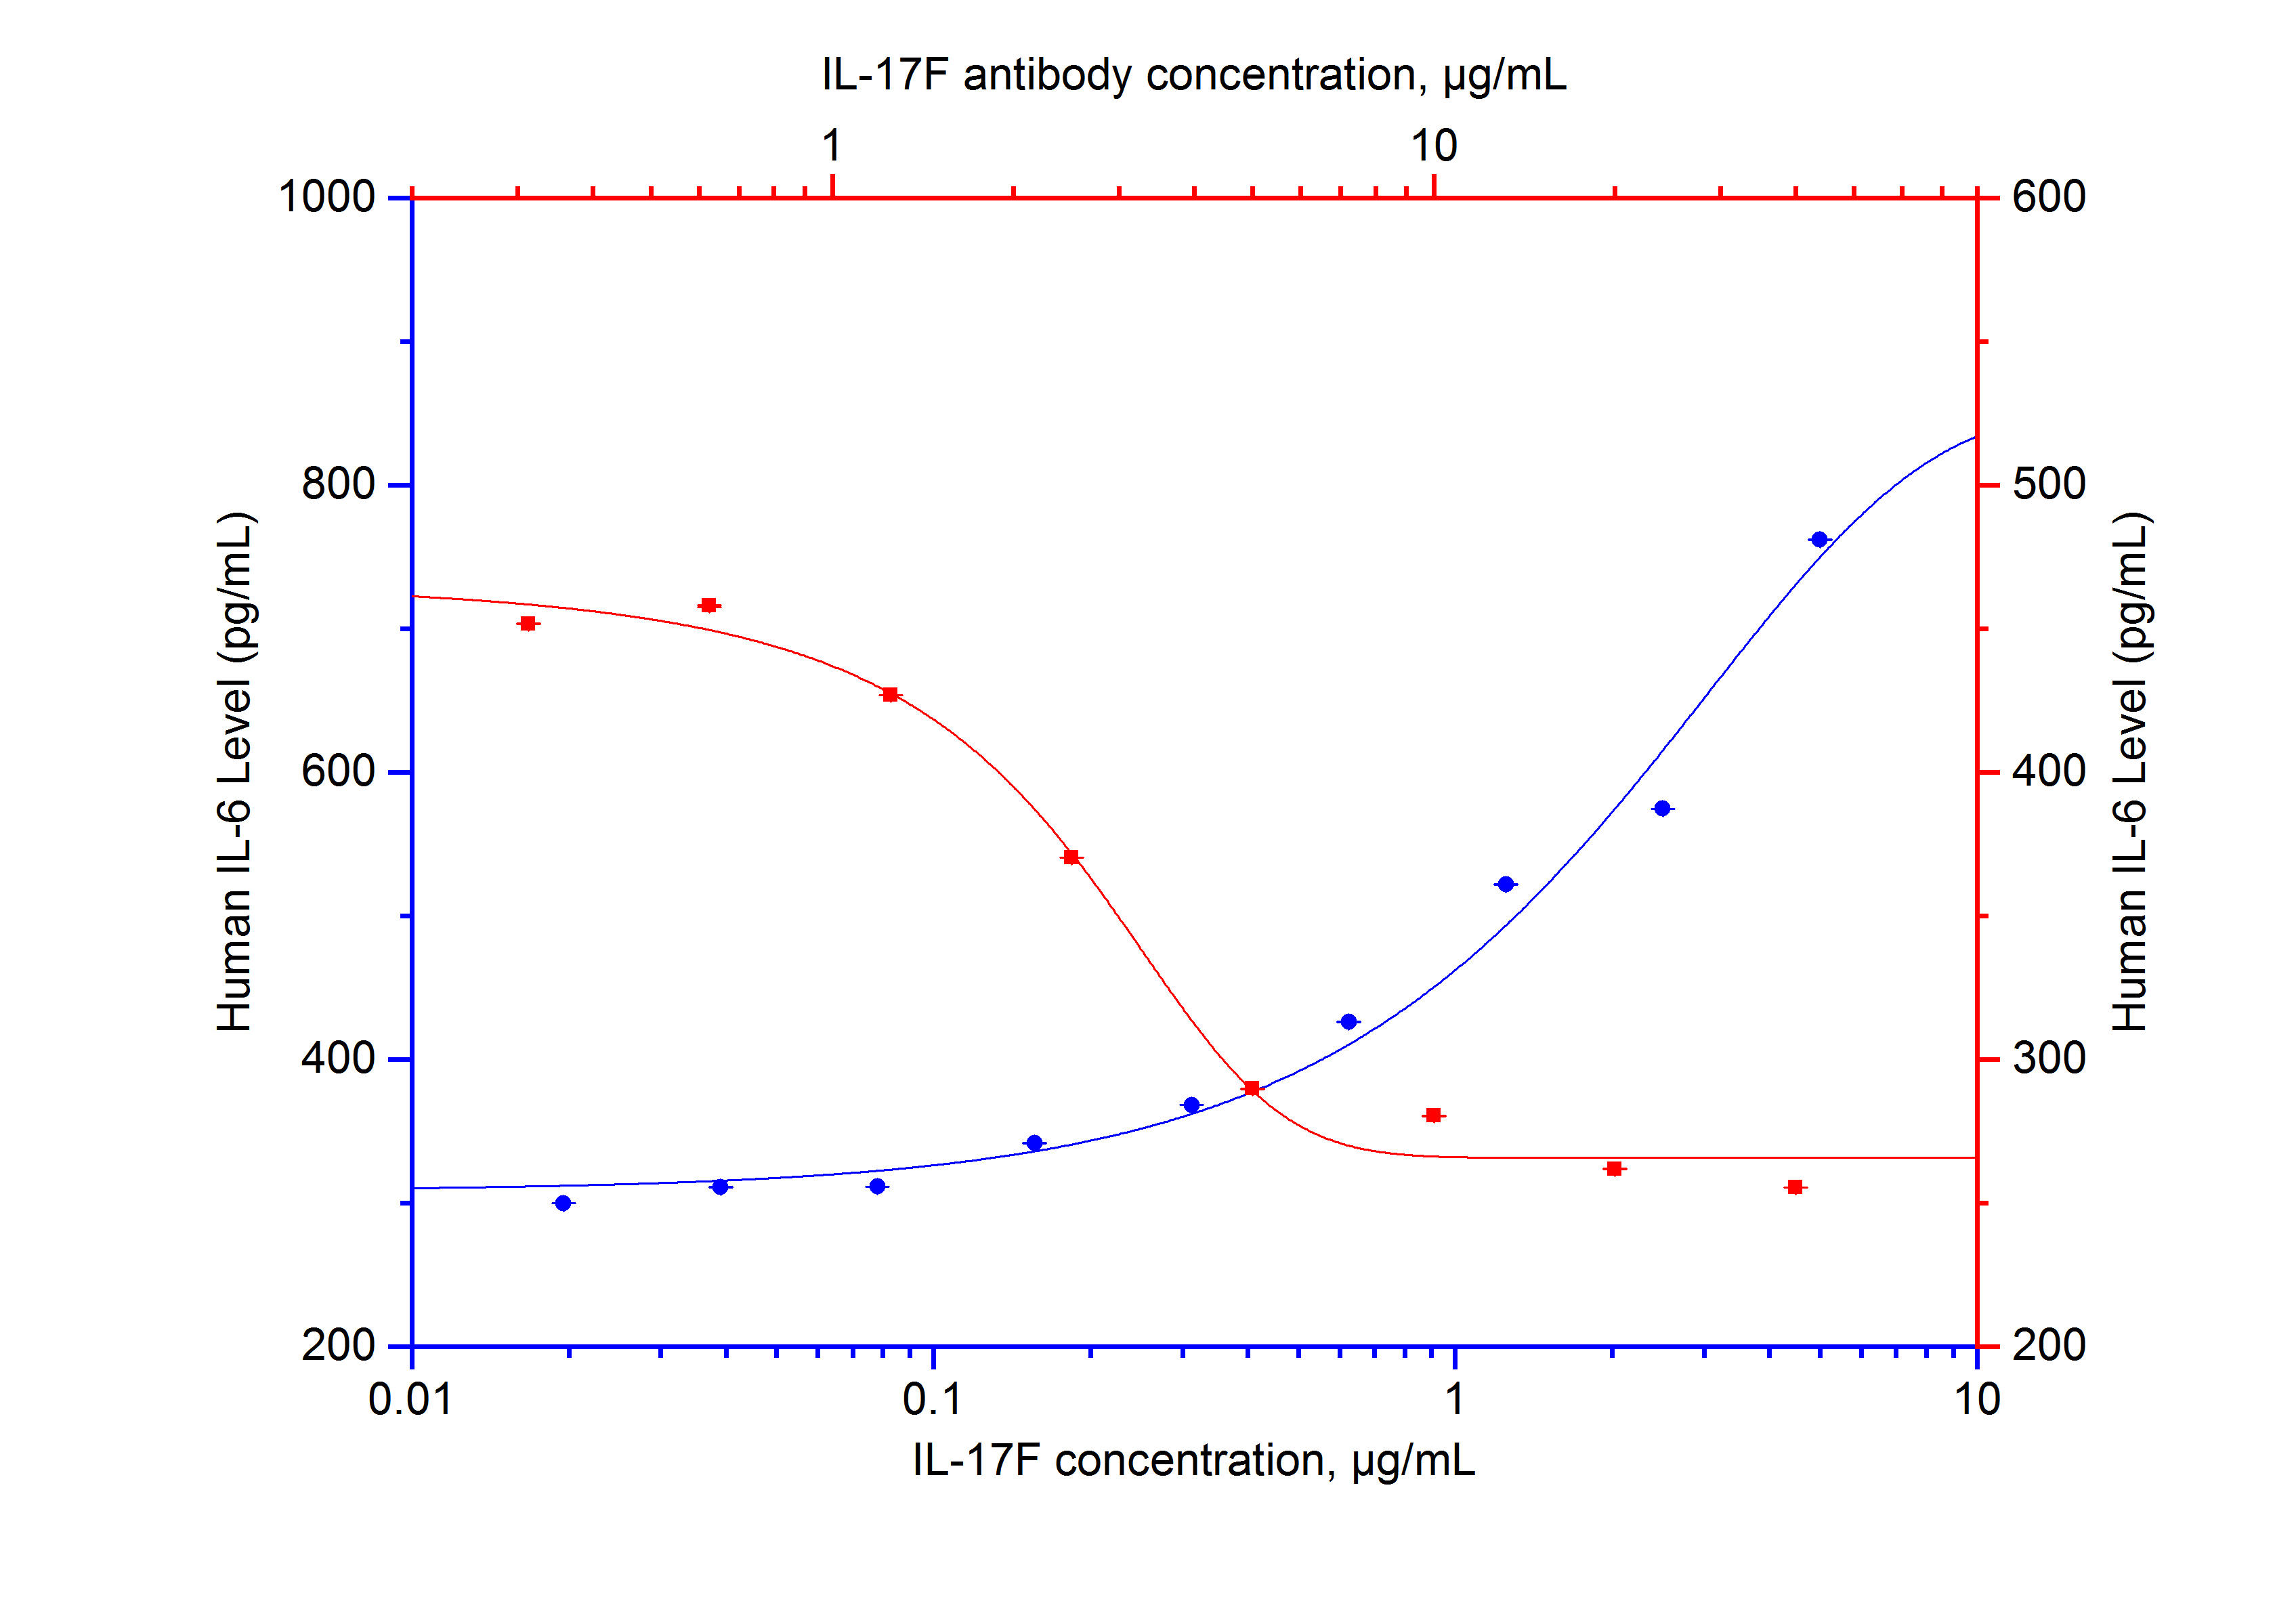 Recombinant human IL-17F (Cat.NO. HZ-1116) stimulates HT-1080 cells (human fibroblast cell line) produce IL-6 in a dose dependent manner (blue curve, refer to bottom X-Left Y axis). The activity of human IL-17F (500 ng/mL HZ-1116) is neutralized by mouse anti-human IL-17F monoclonal antibody 69023-1-Ig (red curve, refer to top X-right Y axis). The ND50 is typically 2-8 µg/mL.